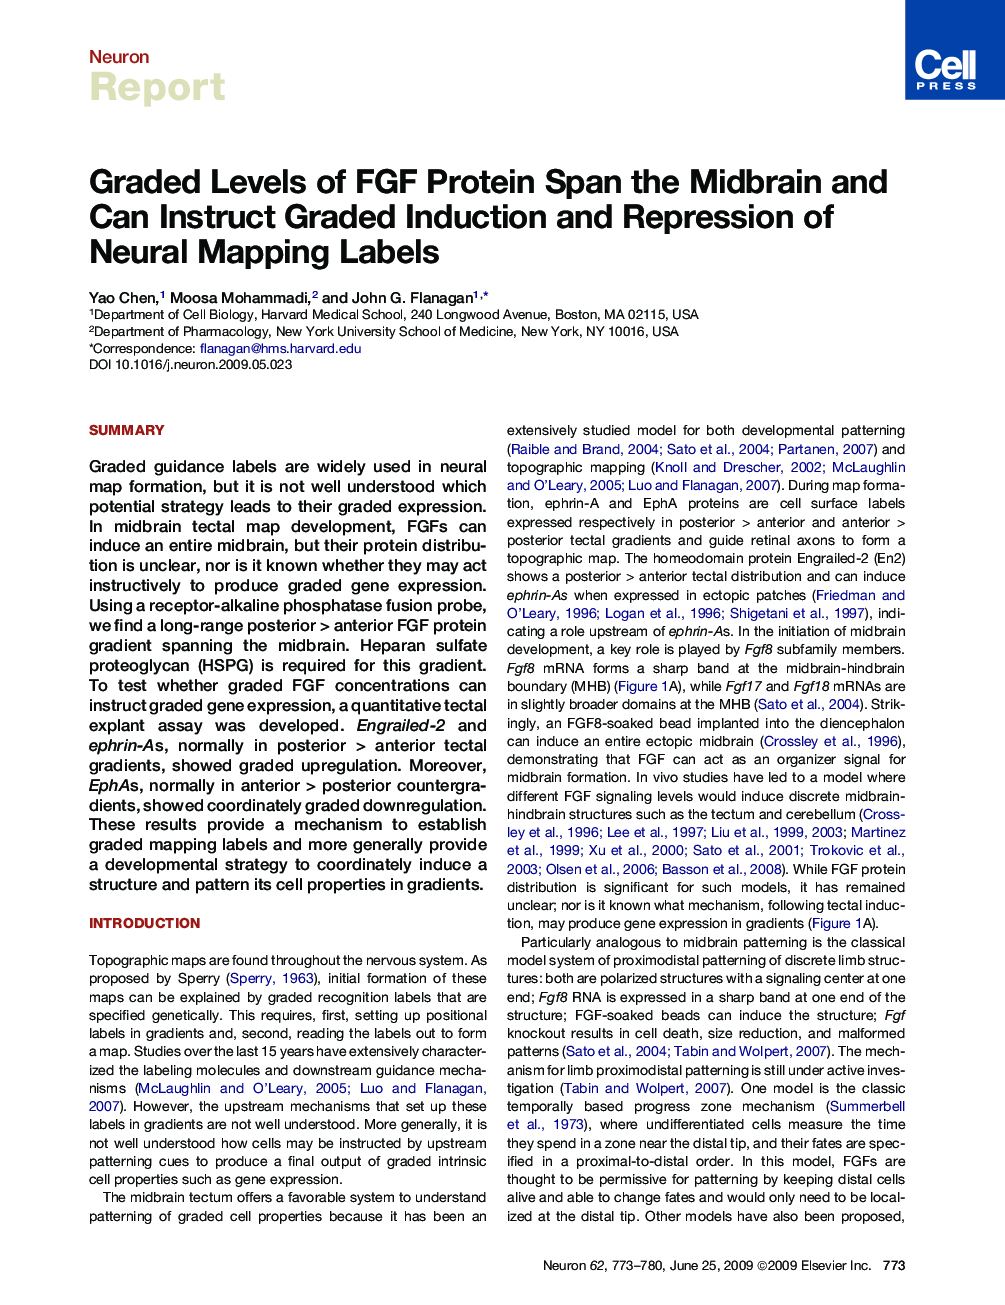 Graded Levels of FGF Protein Span the Midbrain and Can Instruct Graded Induction and Repression of Neural Mapping Labels